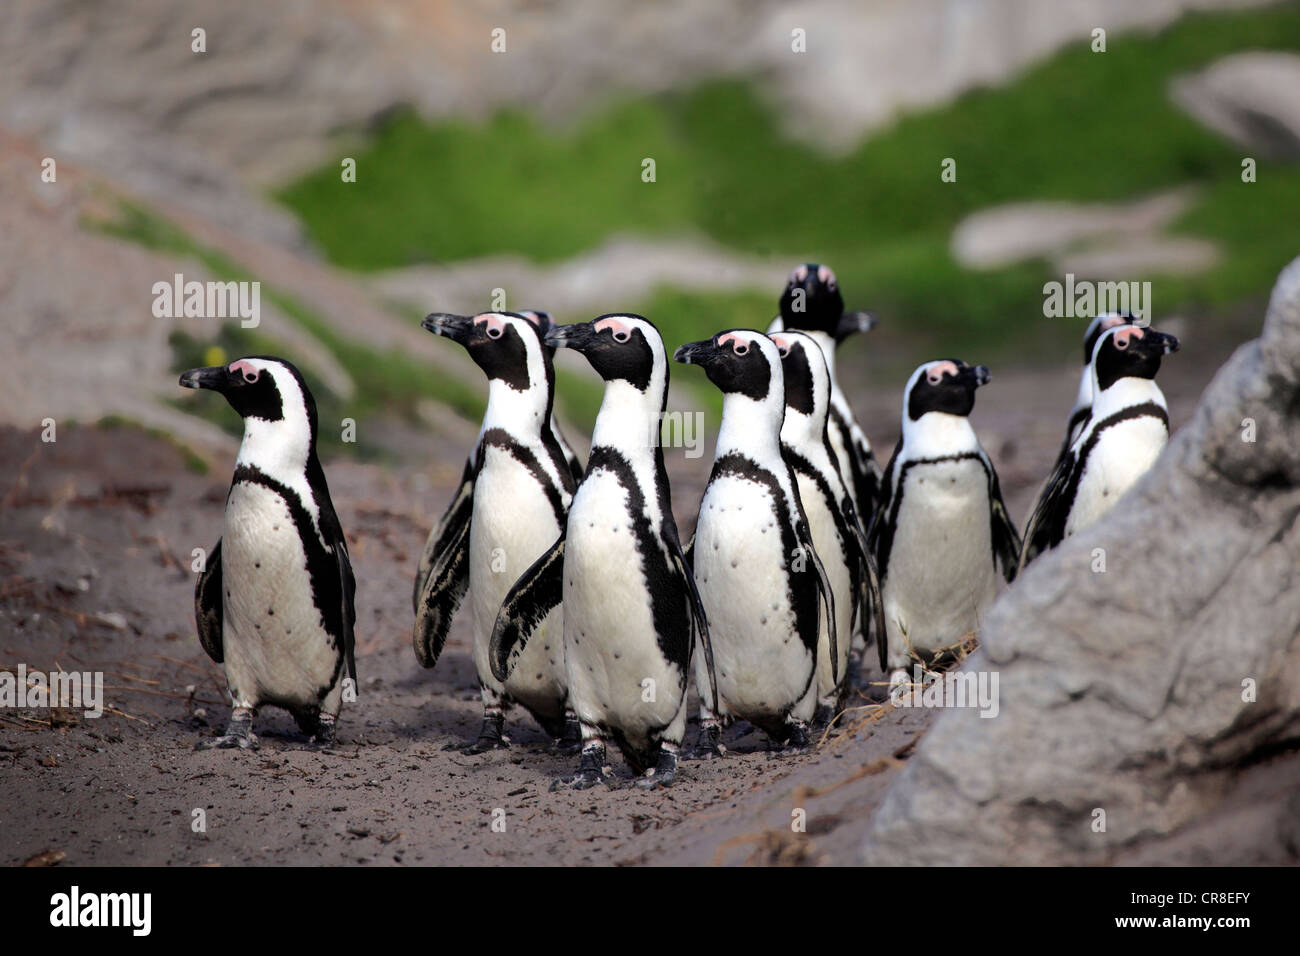 African Penguins, Black-footed Penguin or Jackass Penguin (Spheniscus demersus), group on the beach, Betty's Bay, South Africa Stock Photo